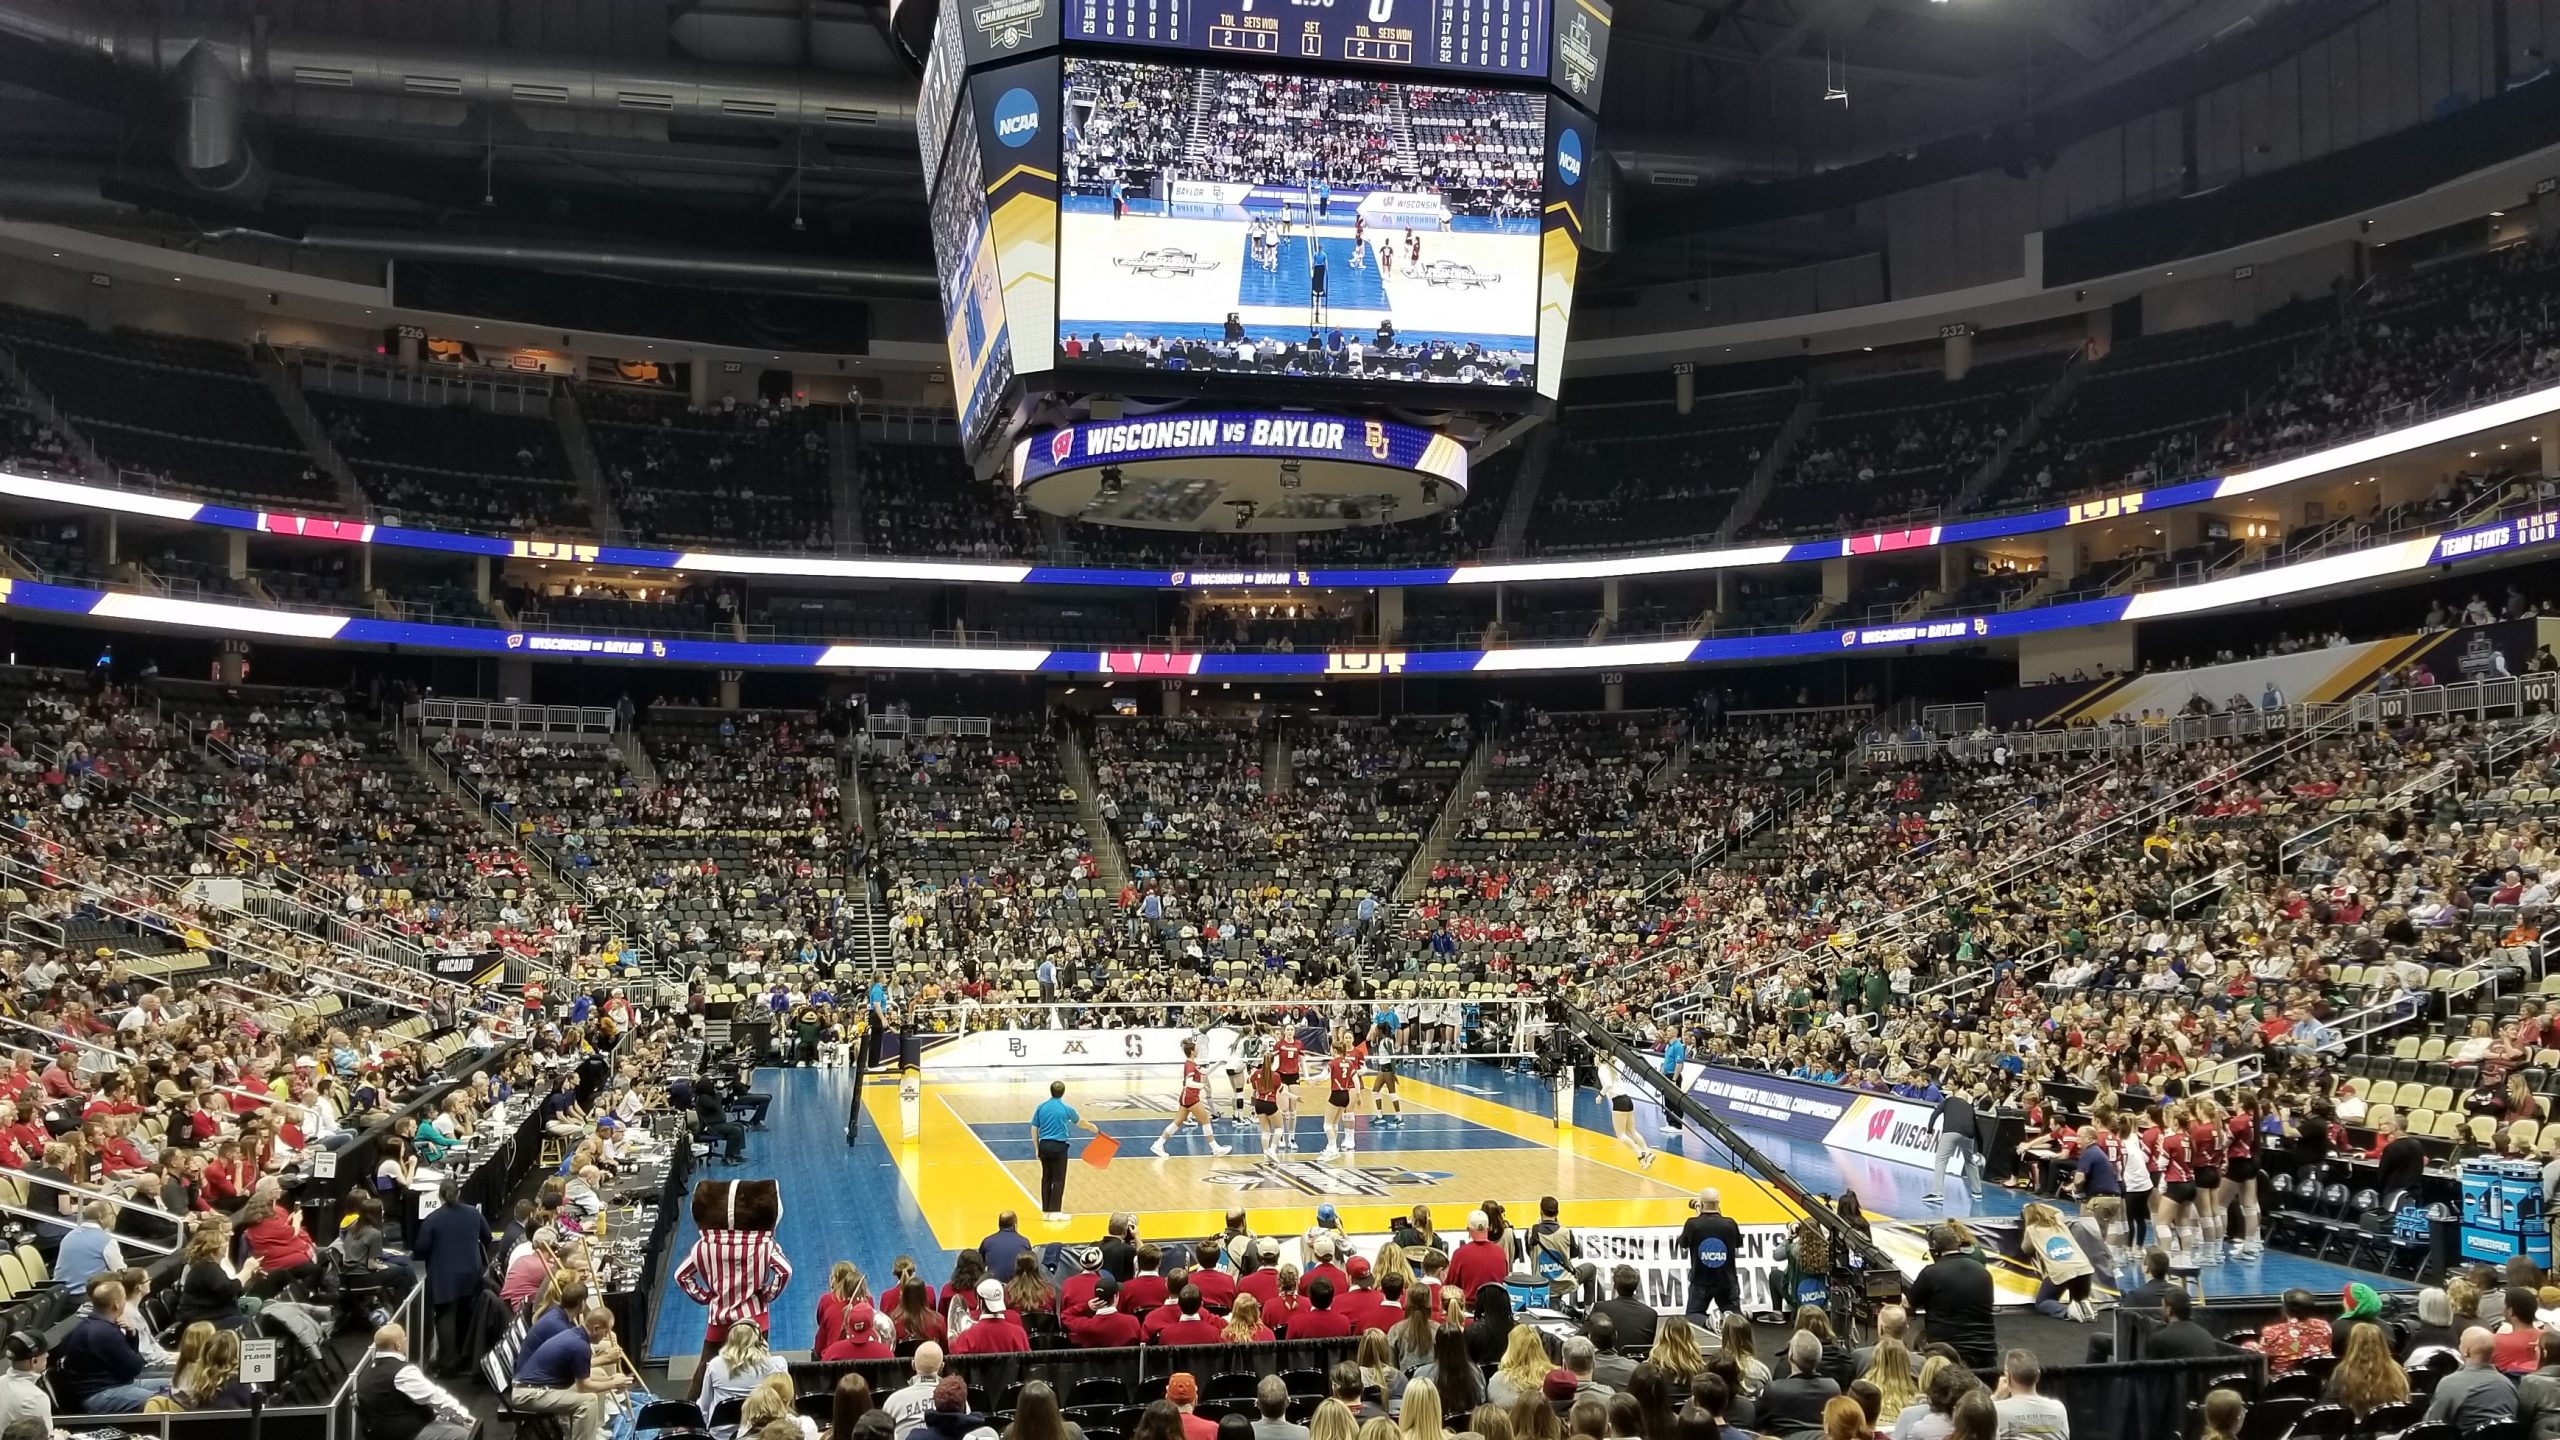 NCAA Semifinals in Pittsburgh